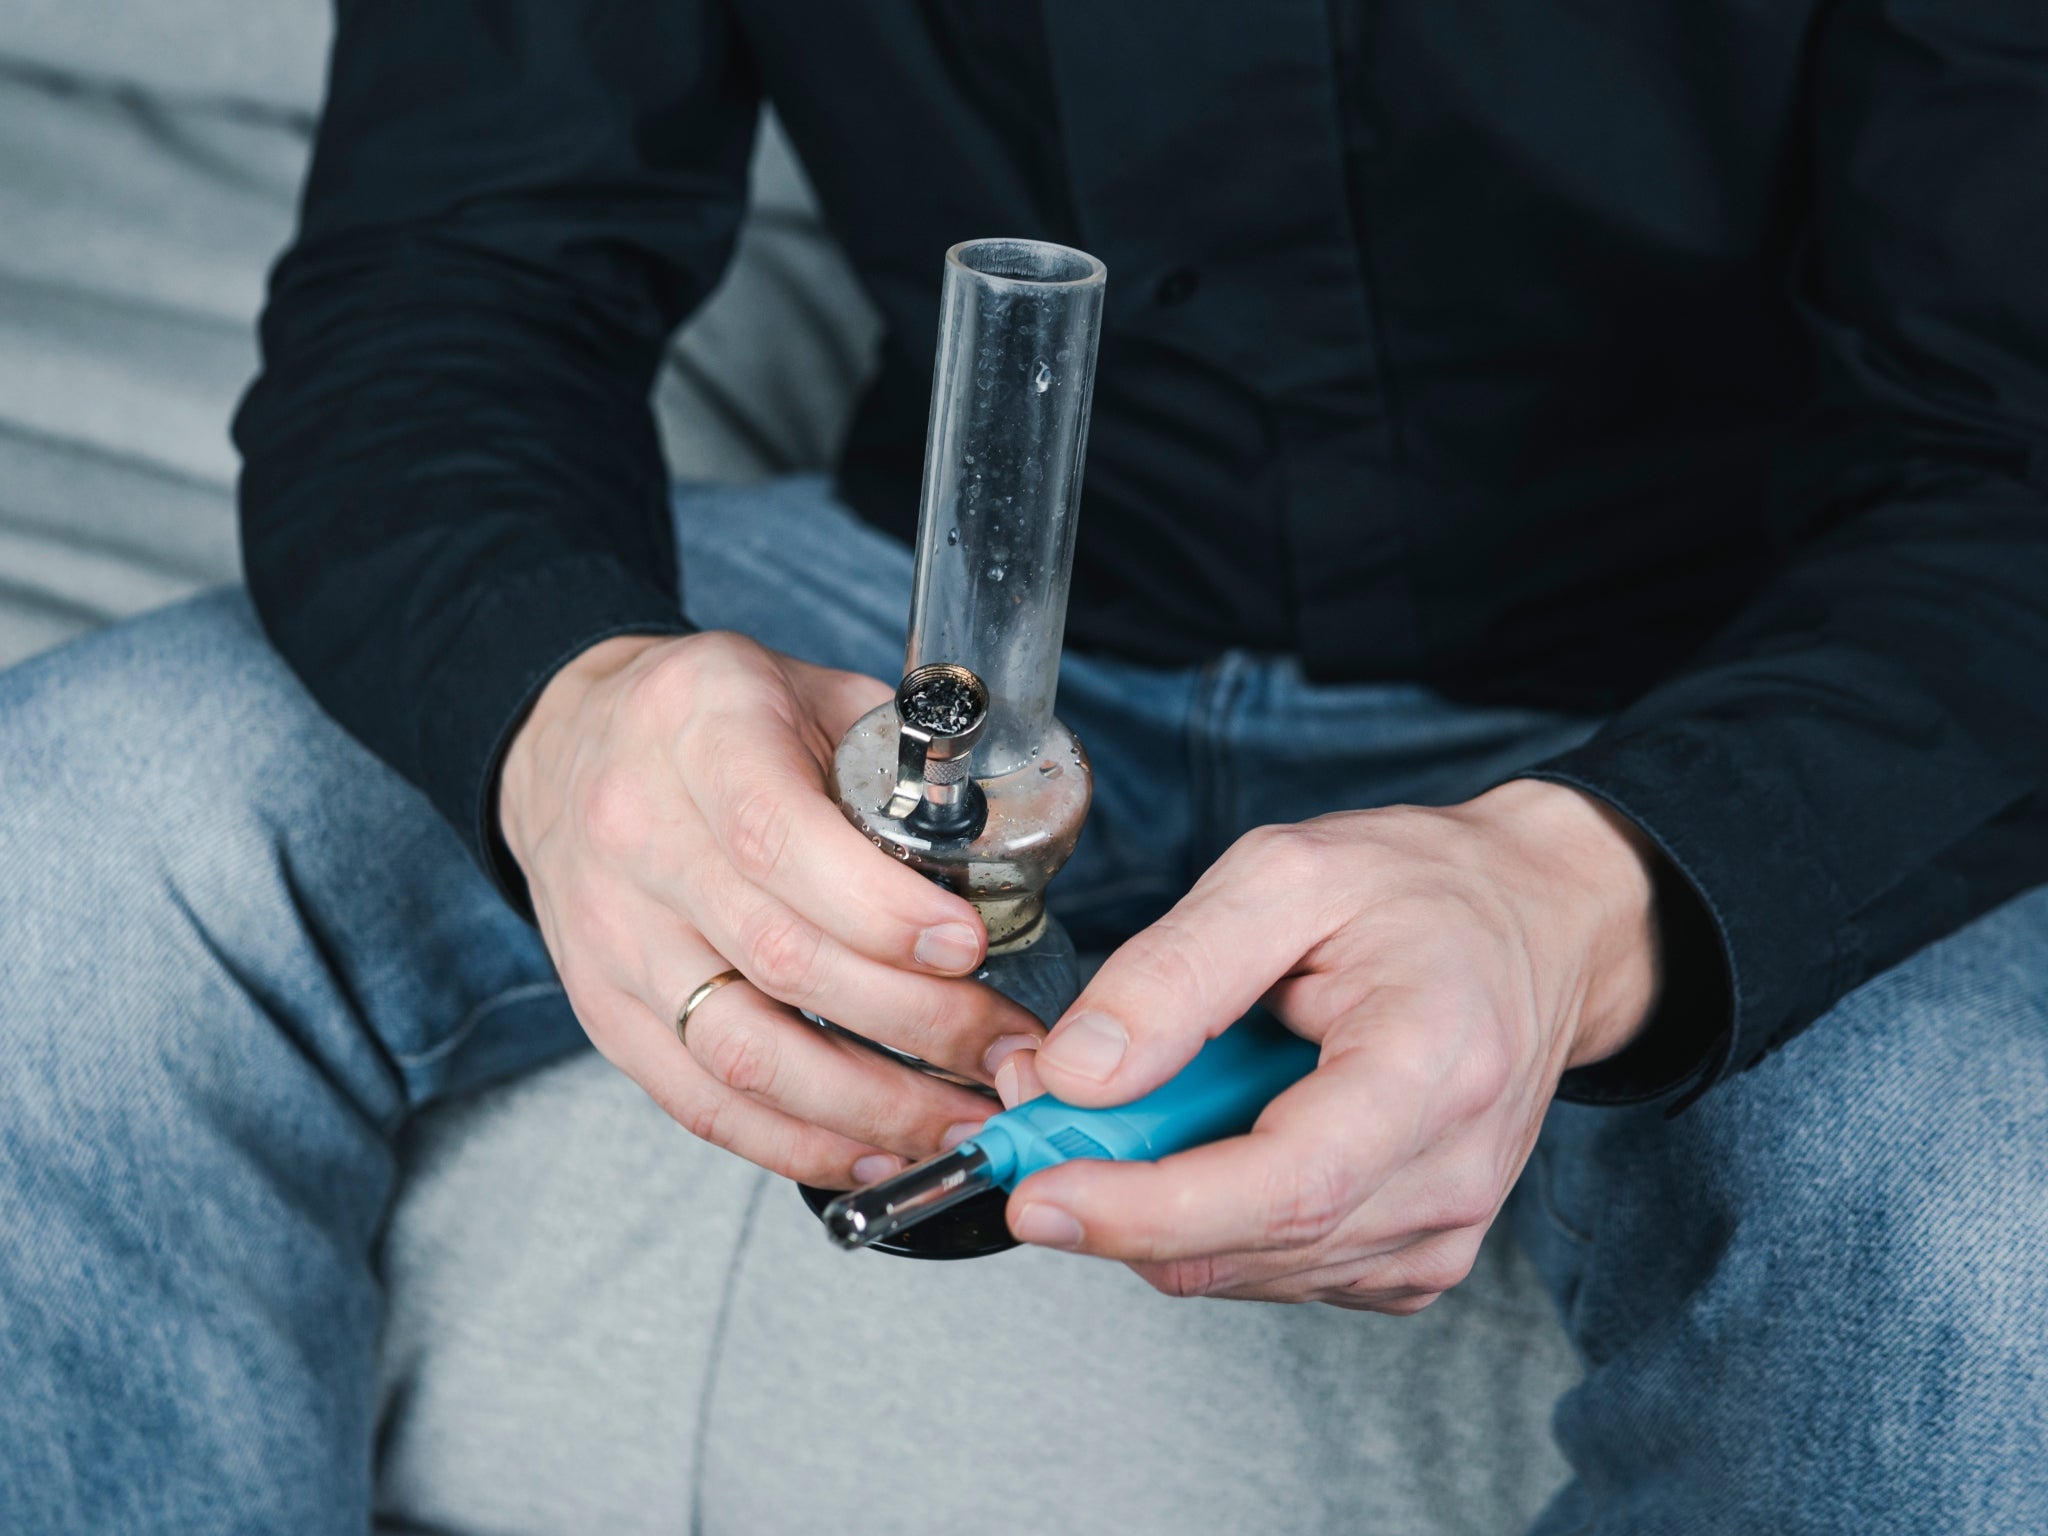 A new study says the reason for this is the increased concentration of fine particulate matter found in secondhand bong smoke